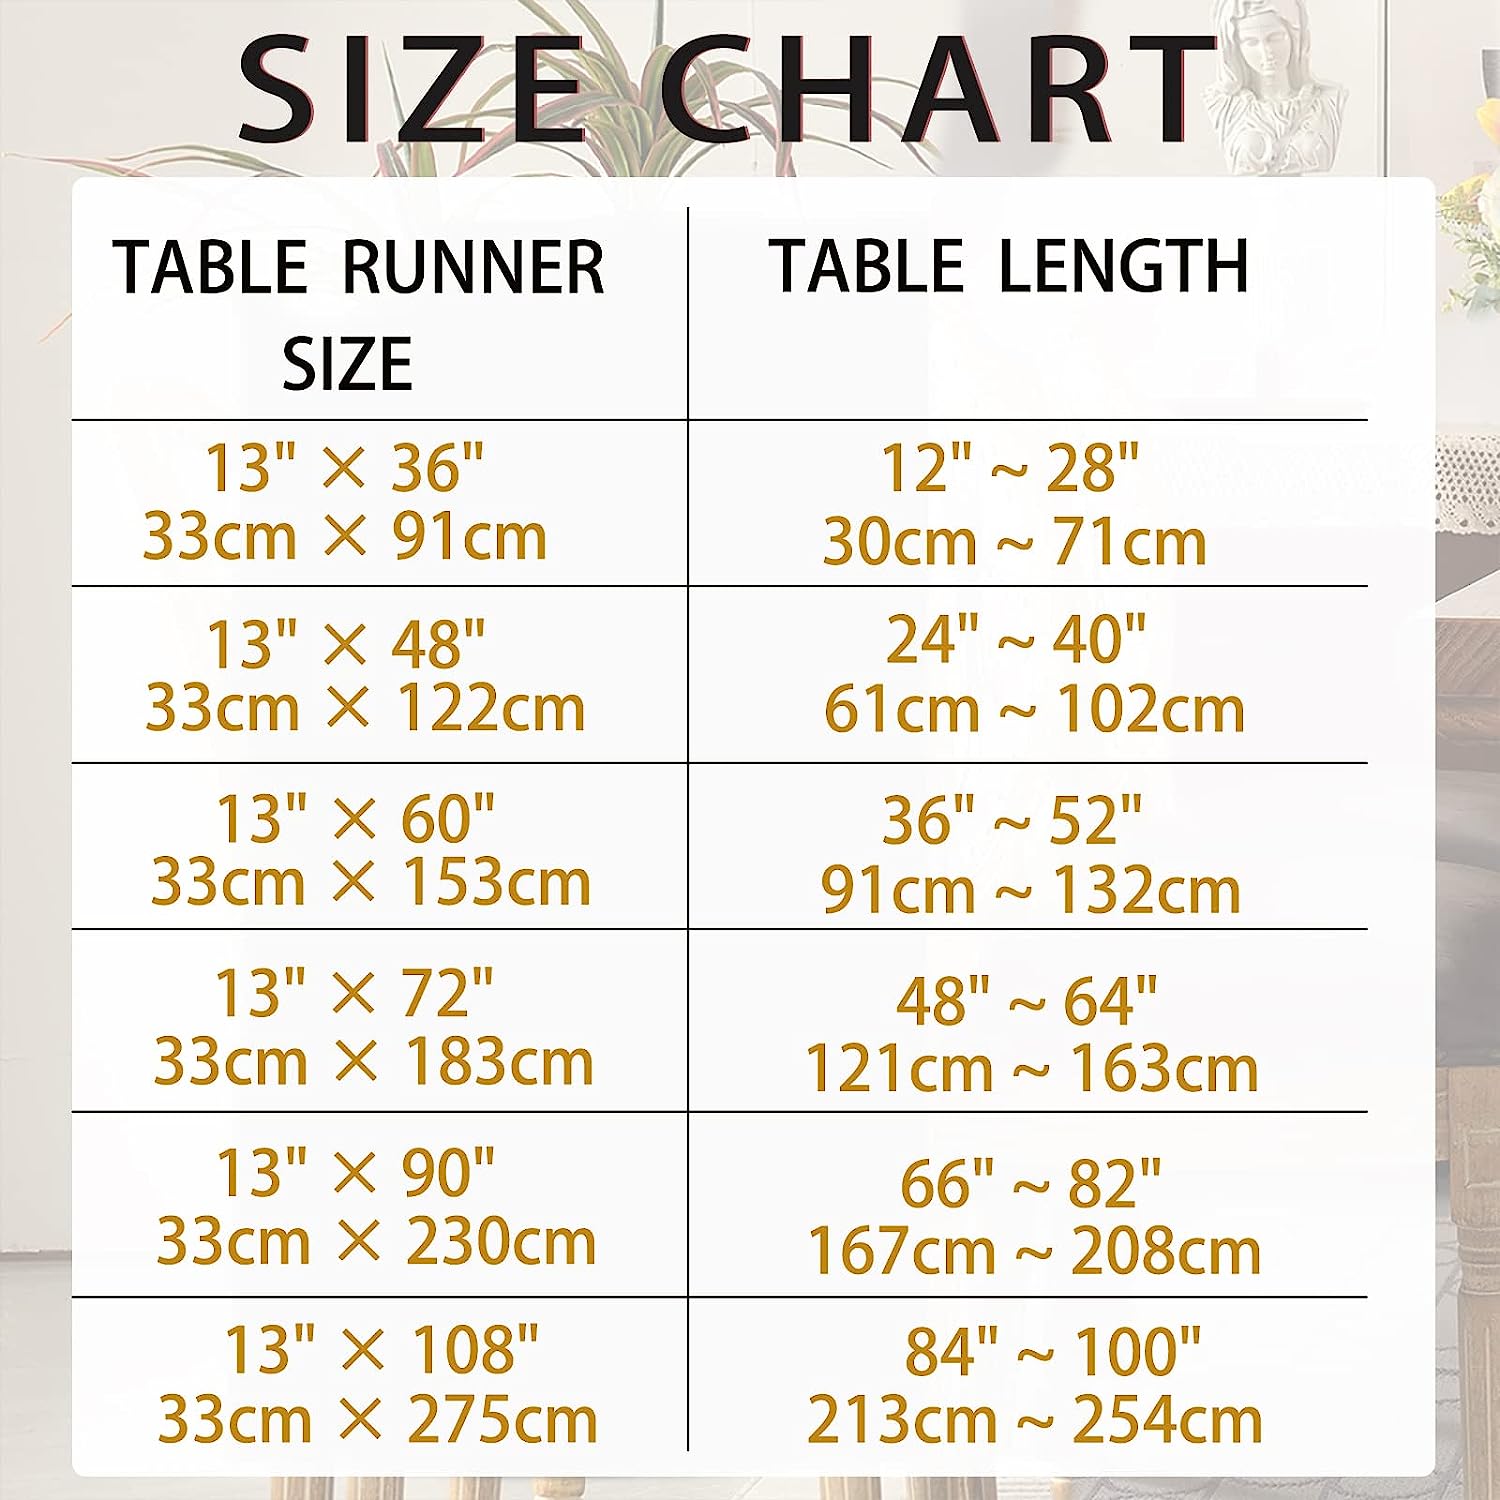 Wracra Cotton Linen Table Runner Farmhouse Style White Table Runner 180cm with Hand-tassels for Party, Dining Room Decorations Dessert Table Decor(White, 180cm) 4